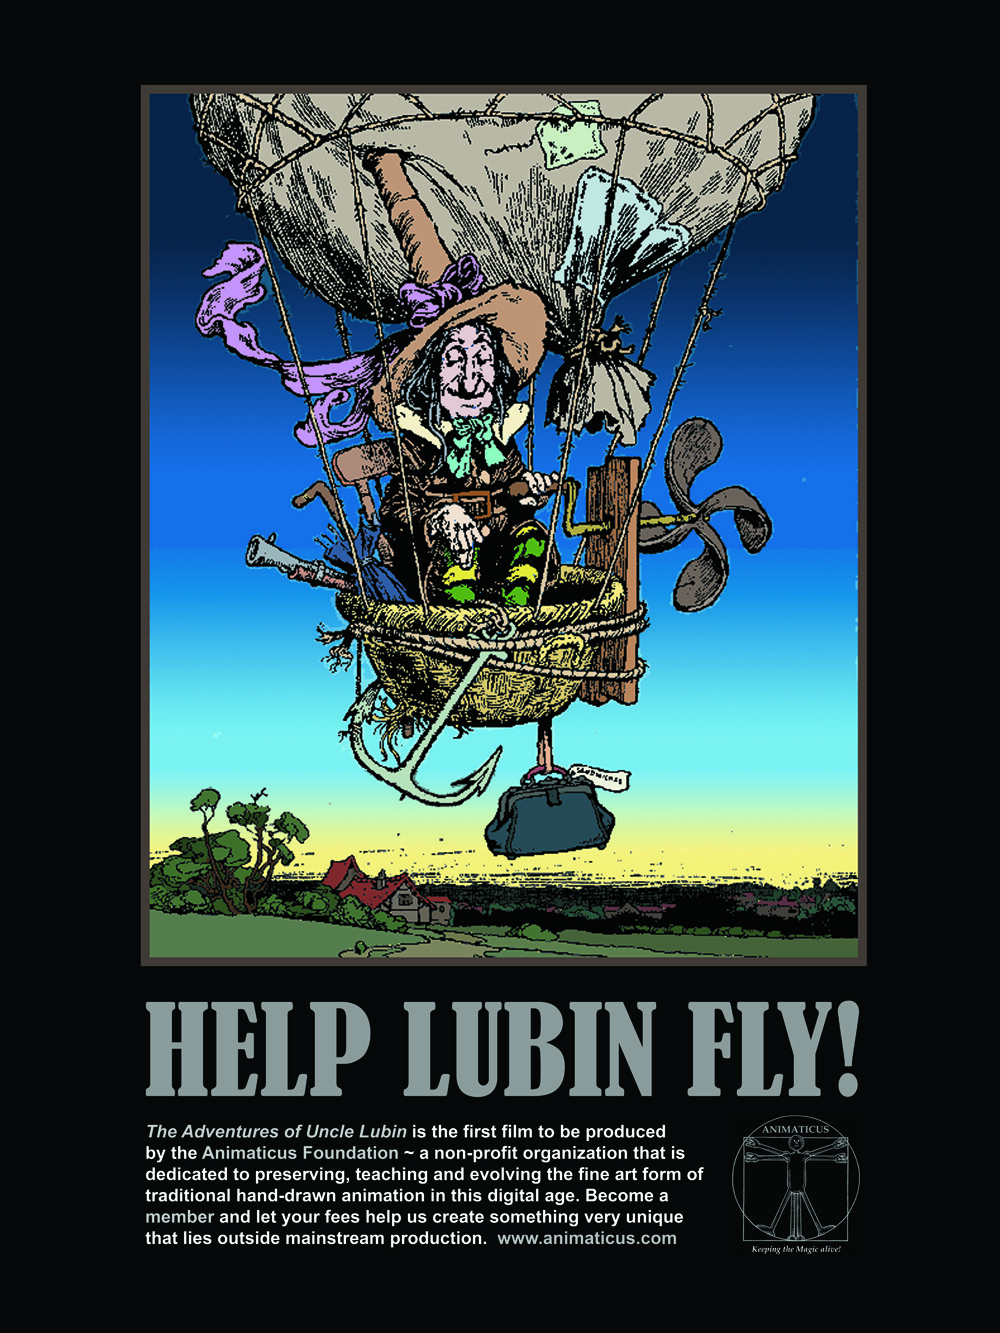 Poster design for "THE ADVENTURES OF UNCLE LUBIN" movie promotion